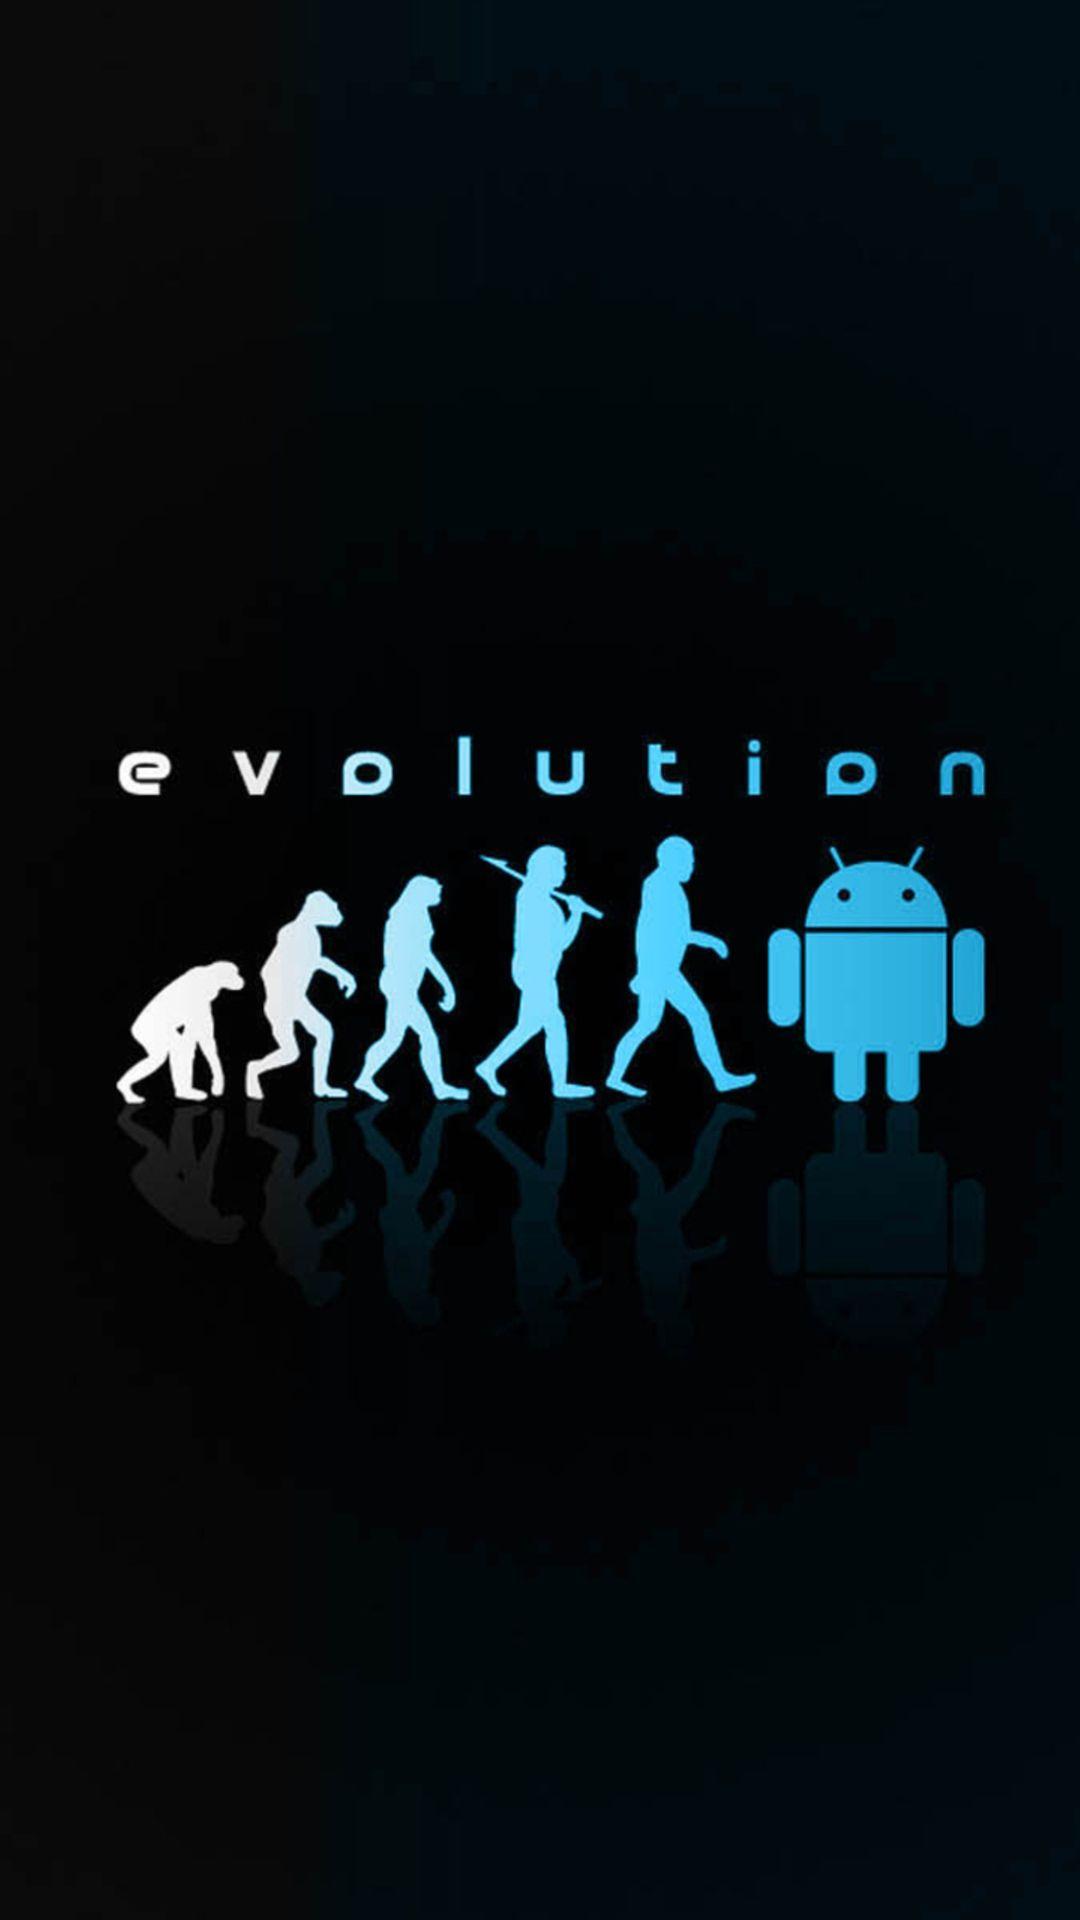 Android Evolution Neon Blue Android Wallpaper free download